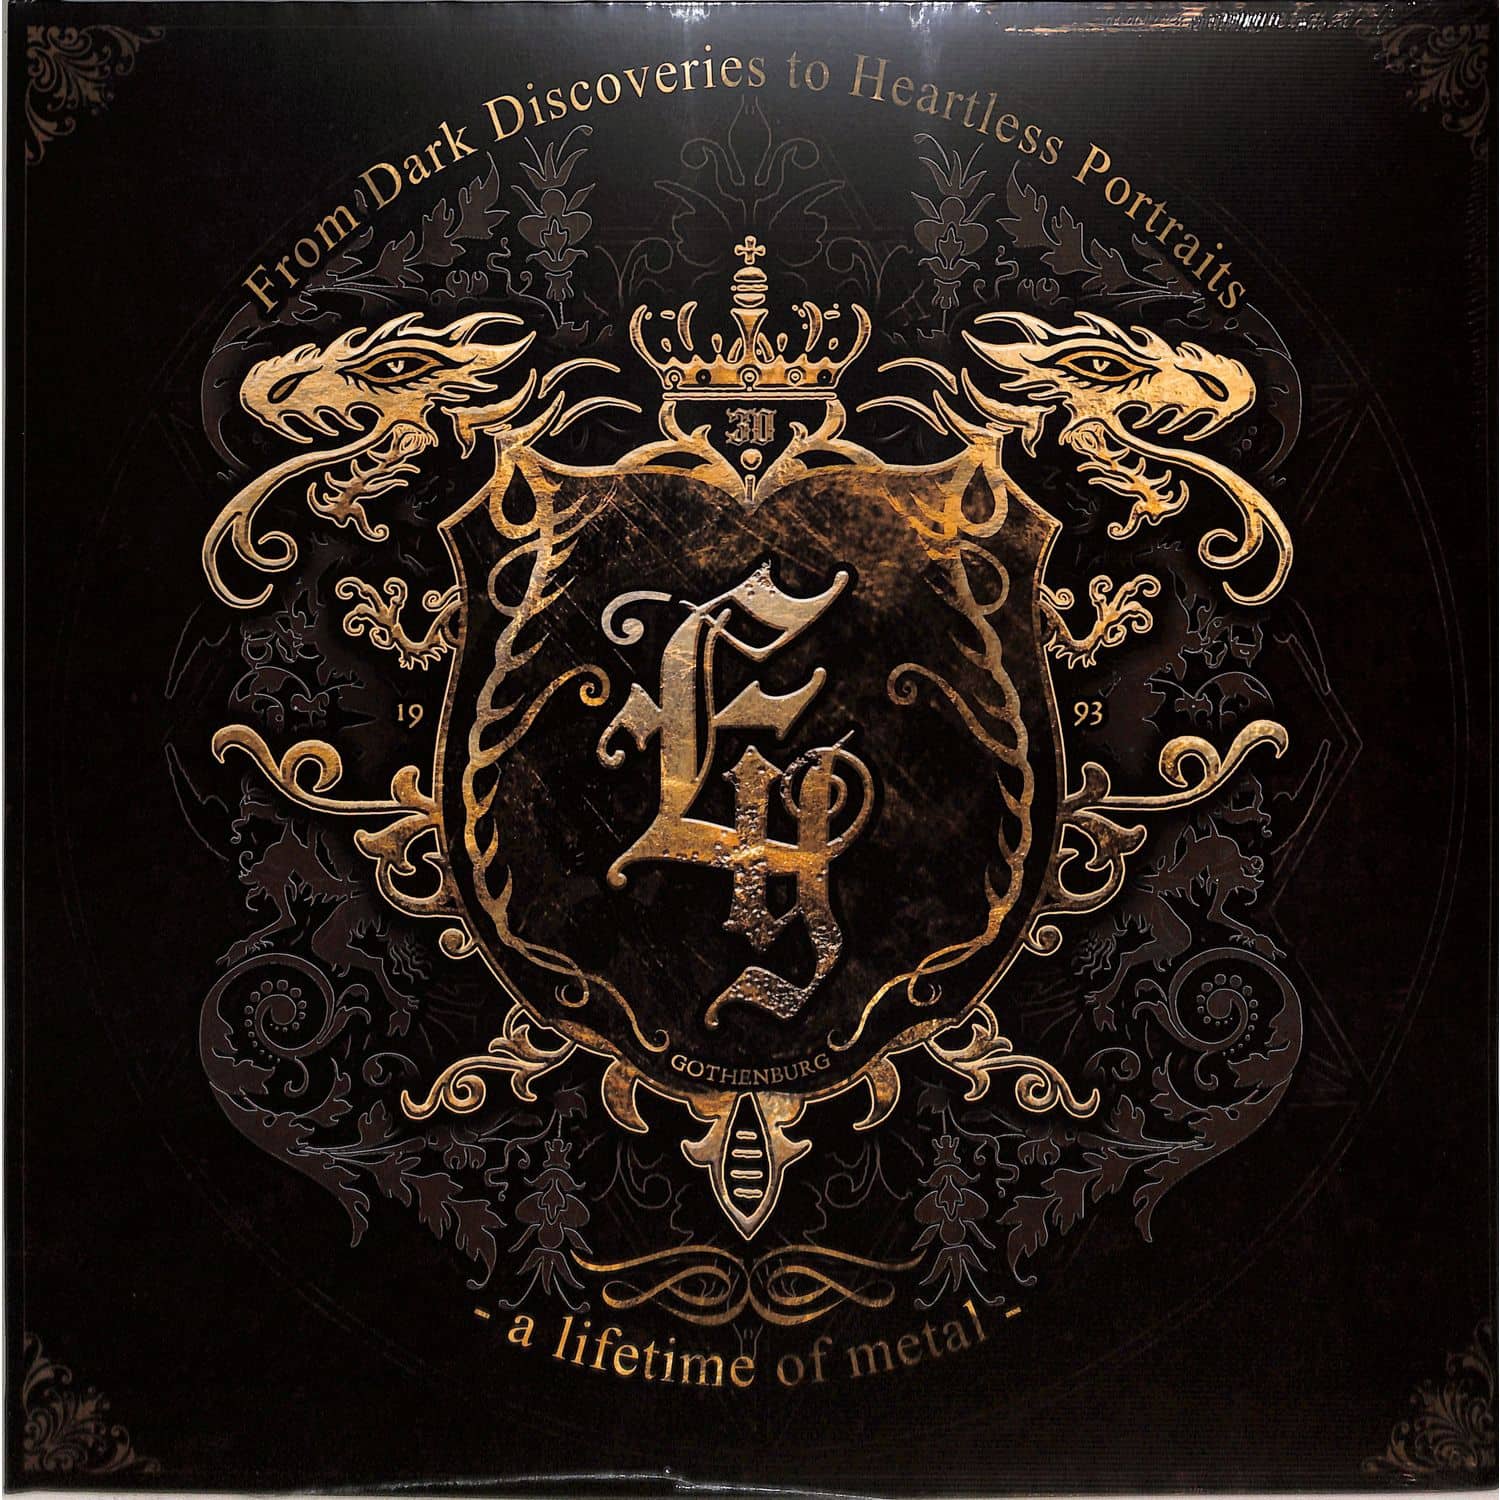 Evergrey - FROM DARK DISCOVERIES TO HEARTLESS PORTRAITS 